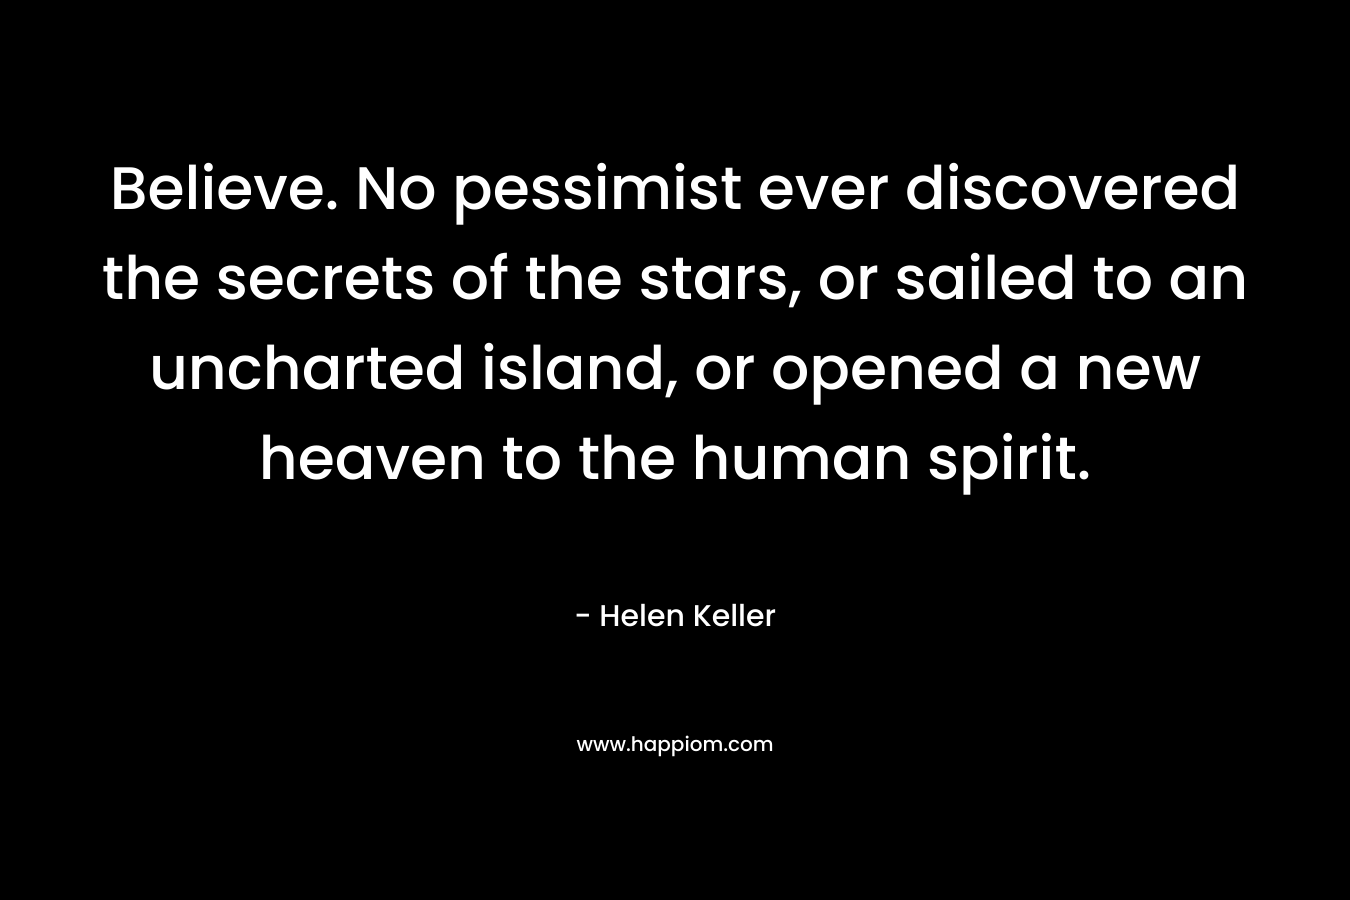 Believe. No pessimist ever discovered the secrets of the stars, or sailed to an uncharted island, or opened a new heaven to the human spirit. – Helen Keller